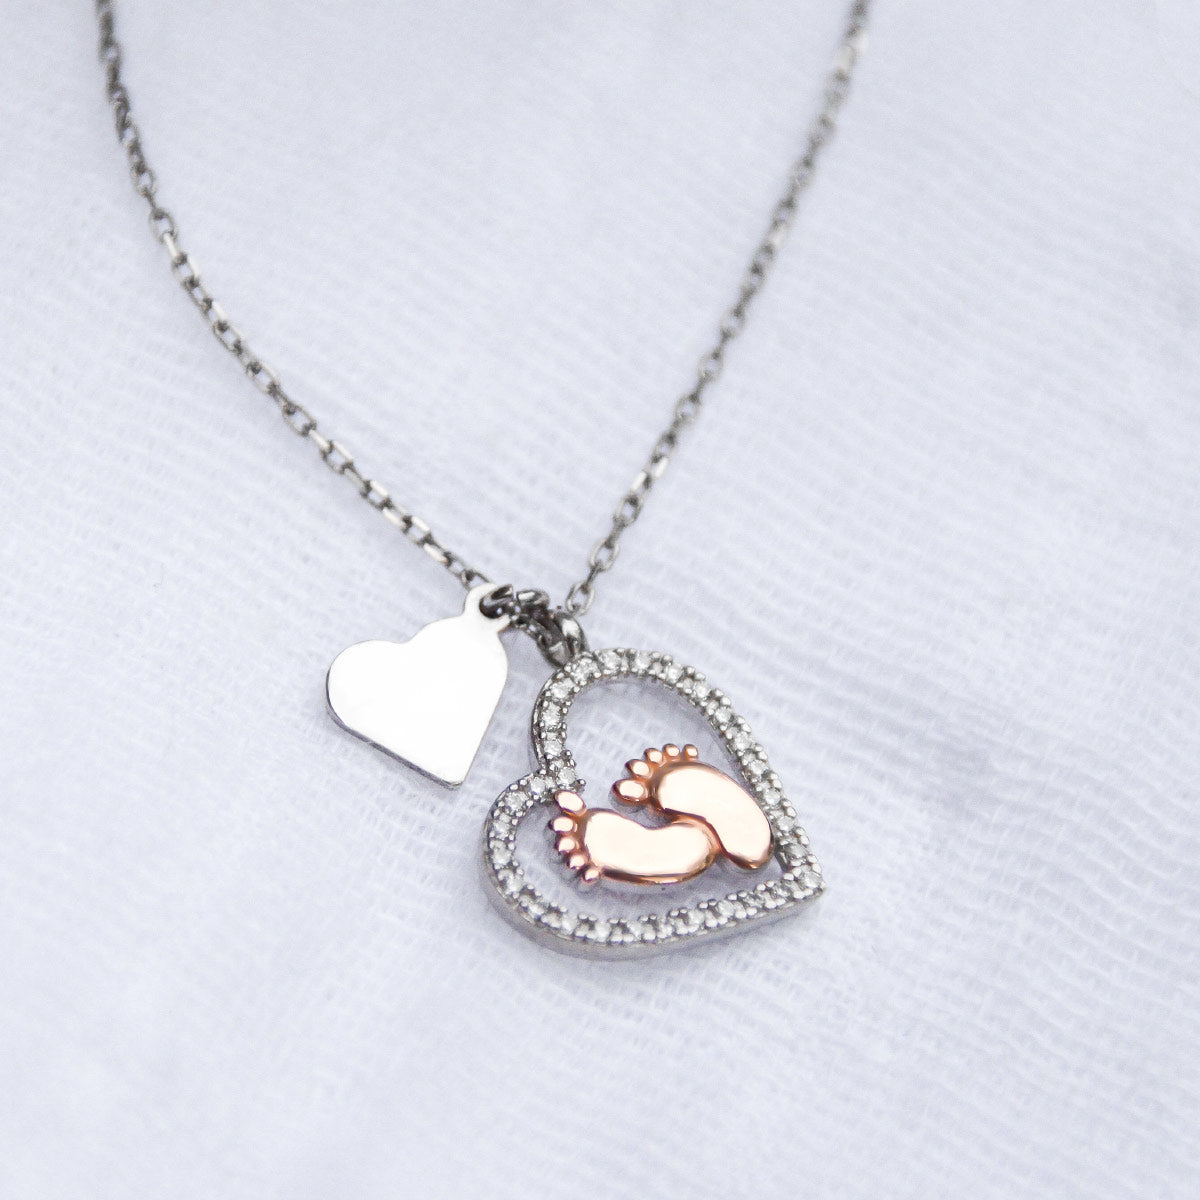 Promoted from Dog Grandma - Baby Feet Heart Necklace Gift Set